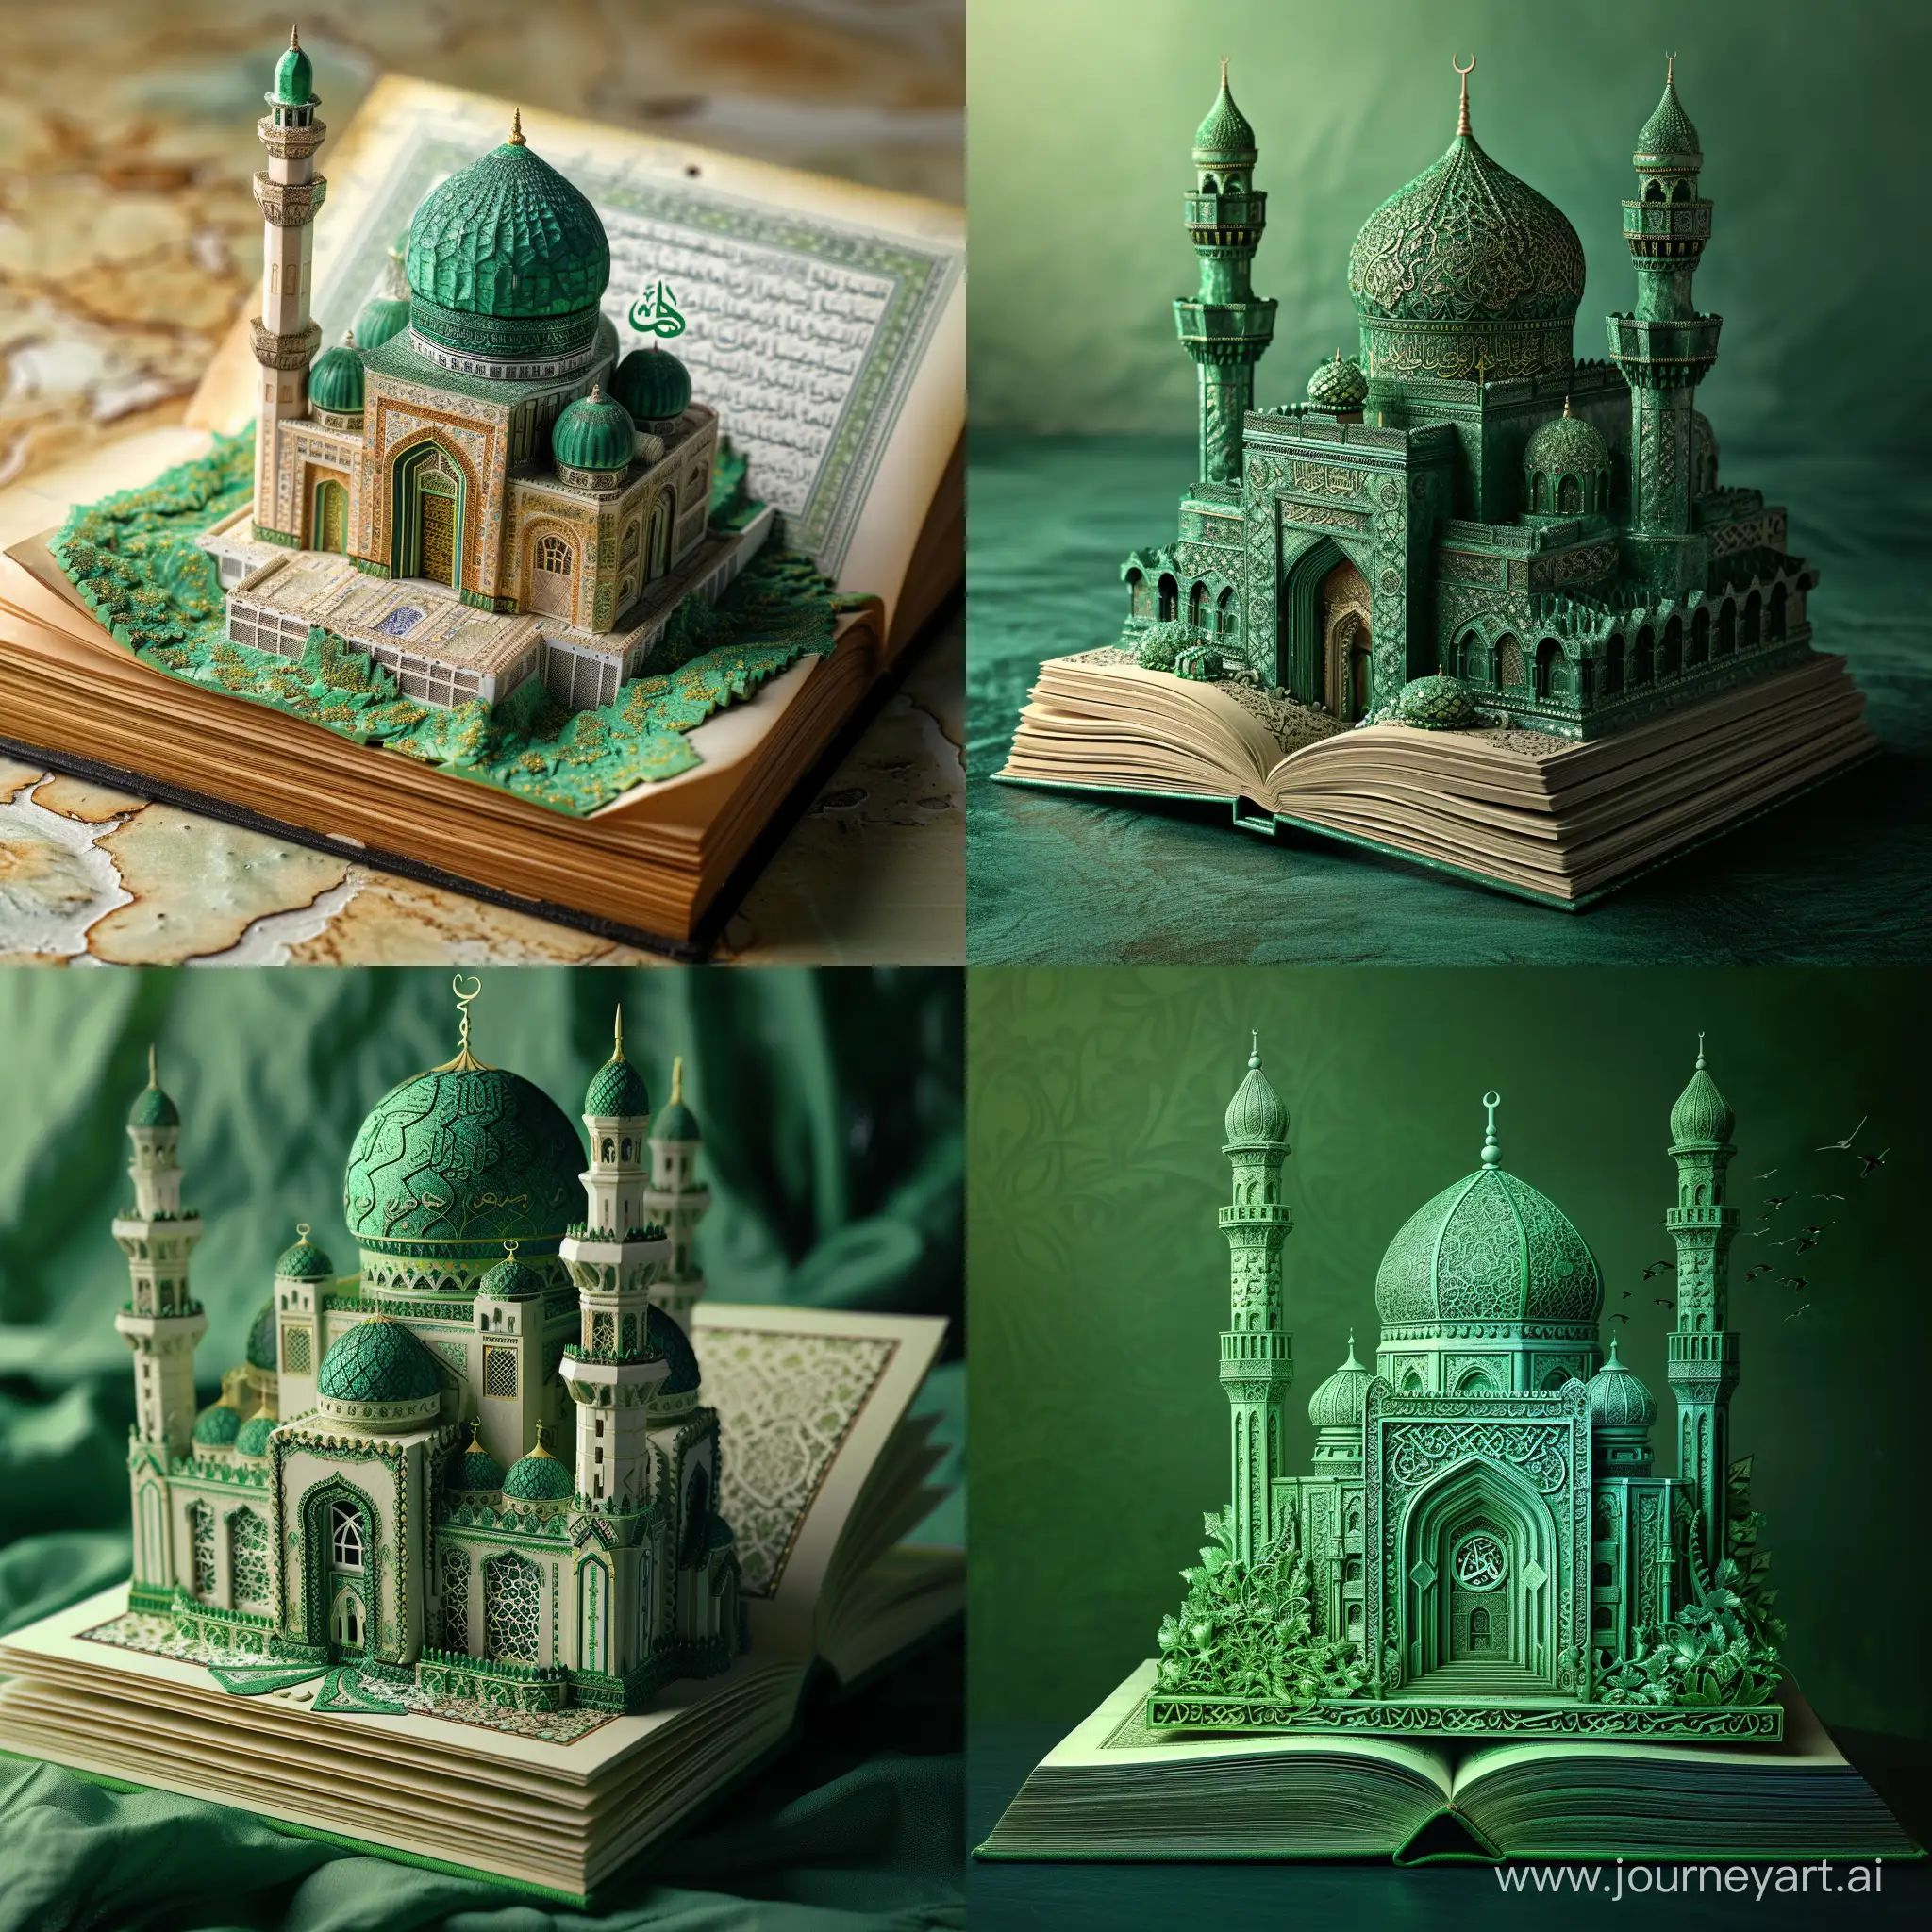 Islamic-Mosque-Inspired-by-Hazrat-Muhammads-Tomb-on-Quran-Book